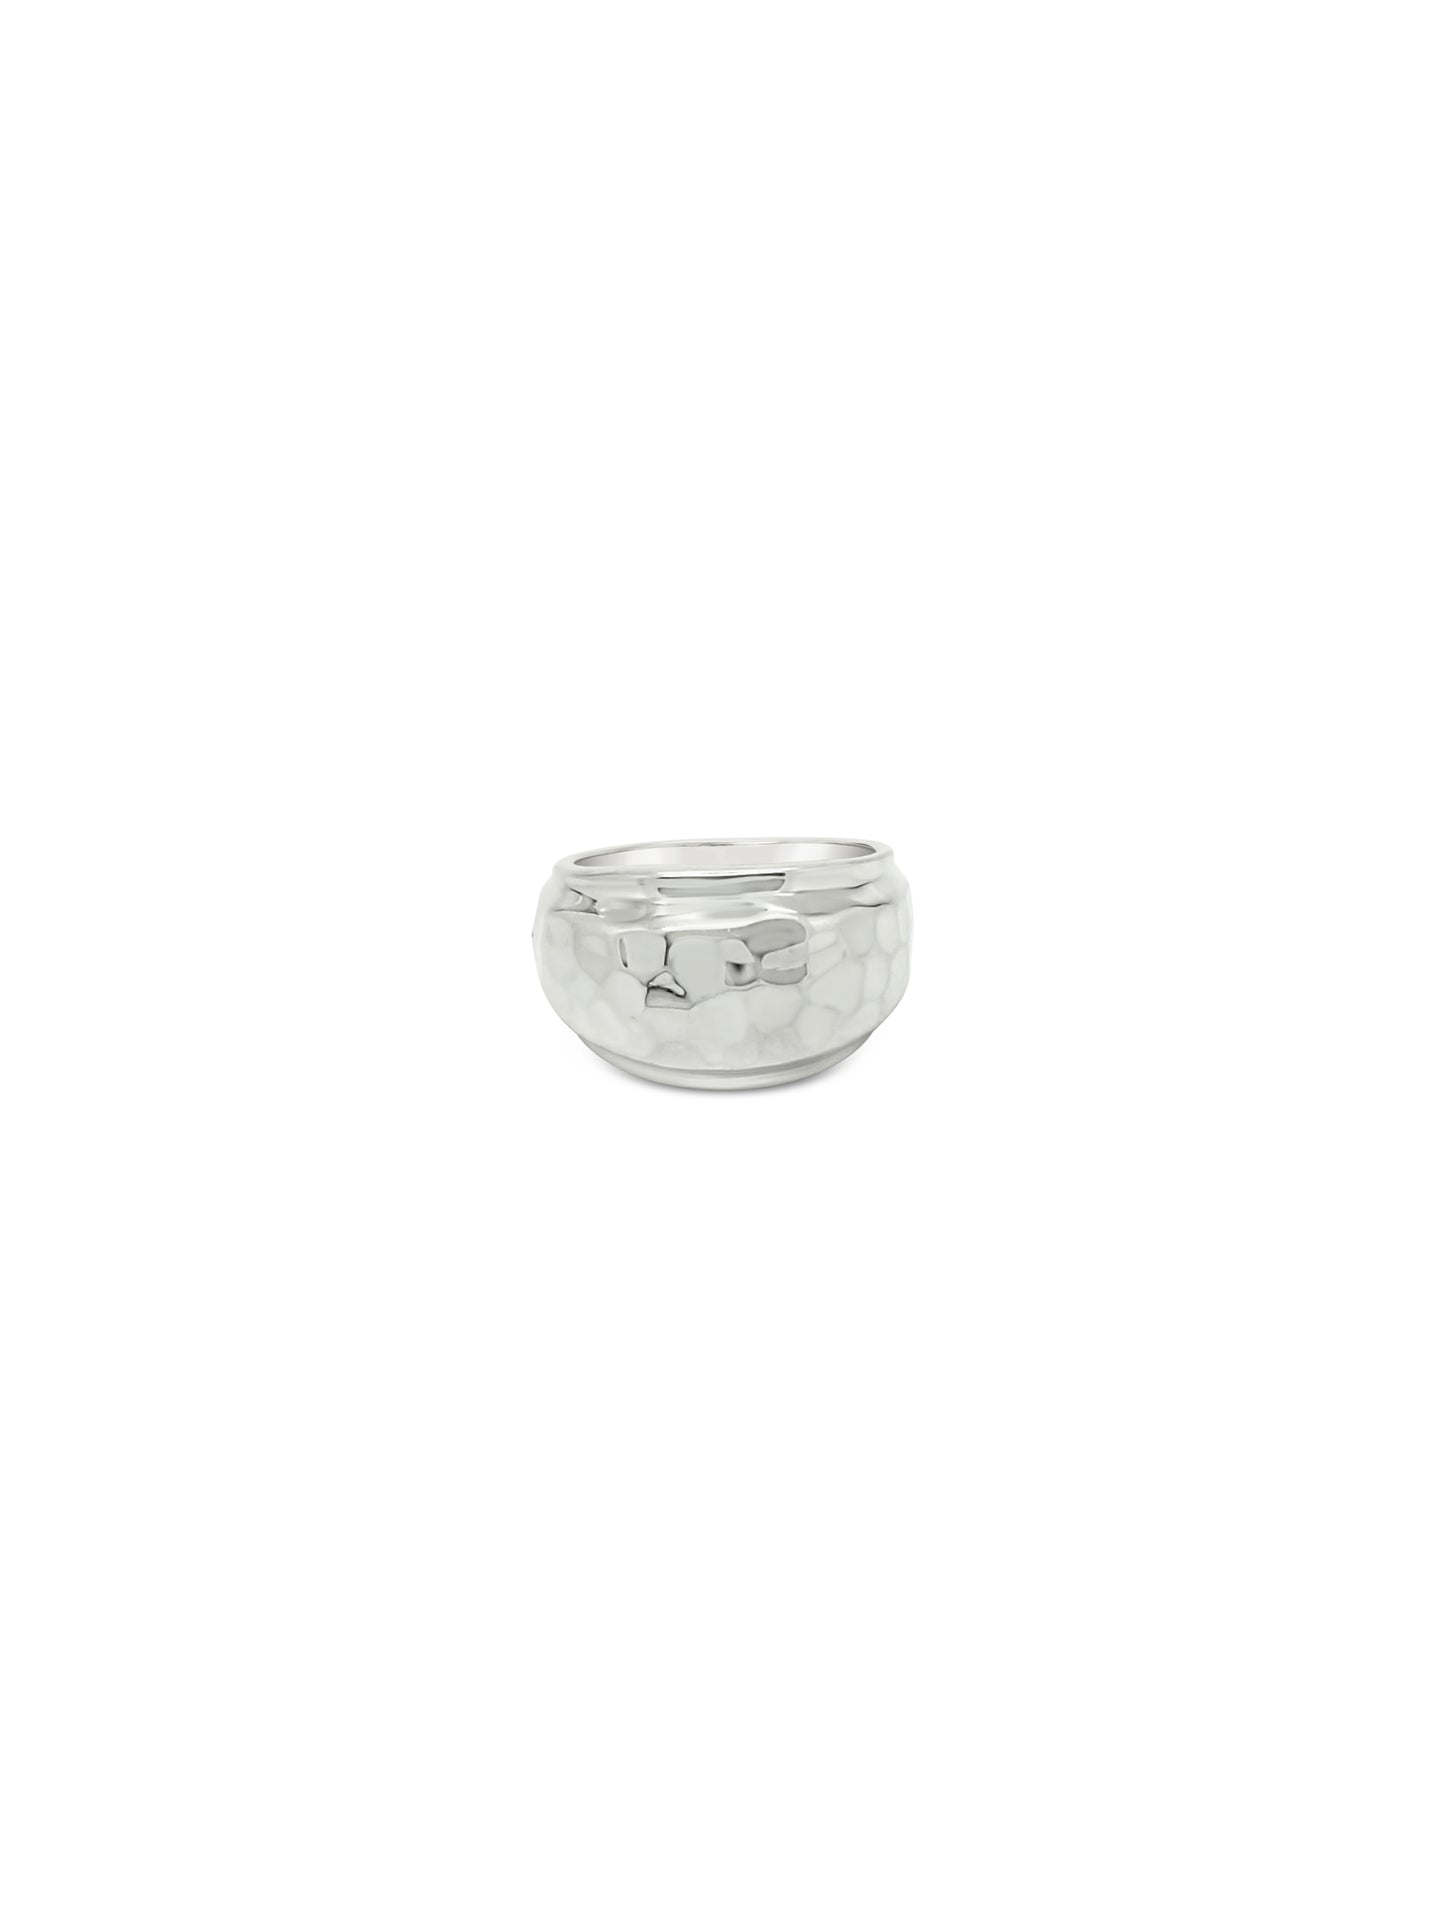 Combination Dome Ring